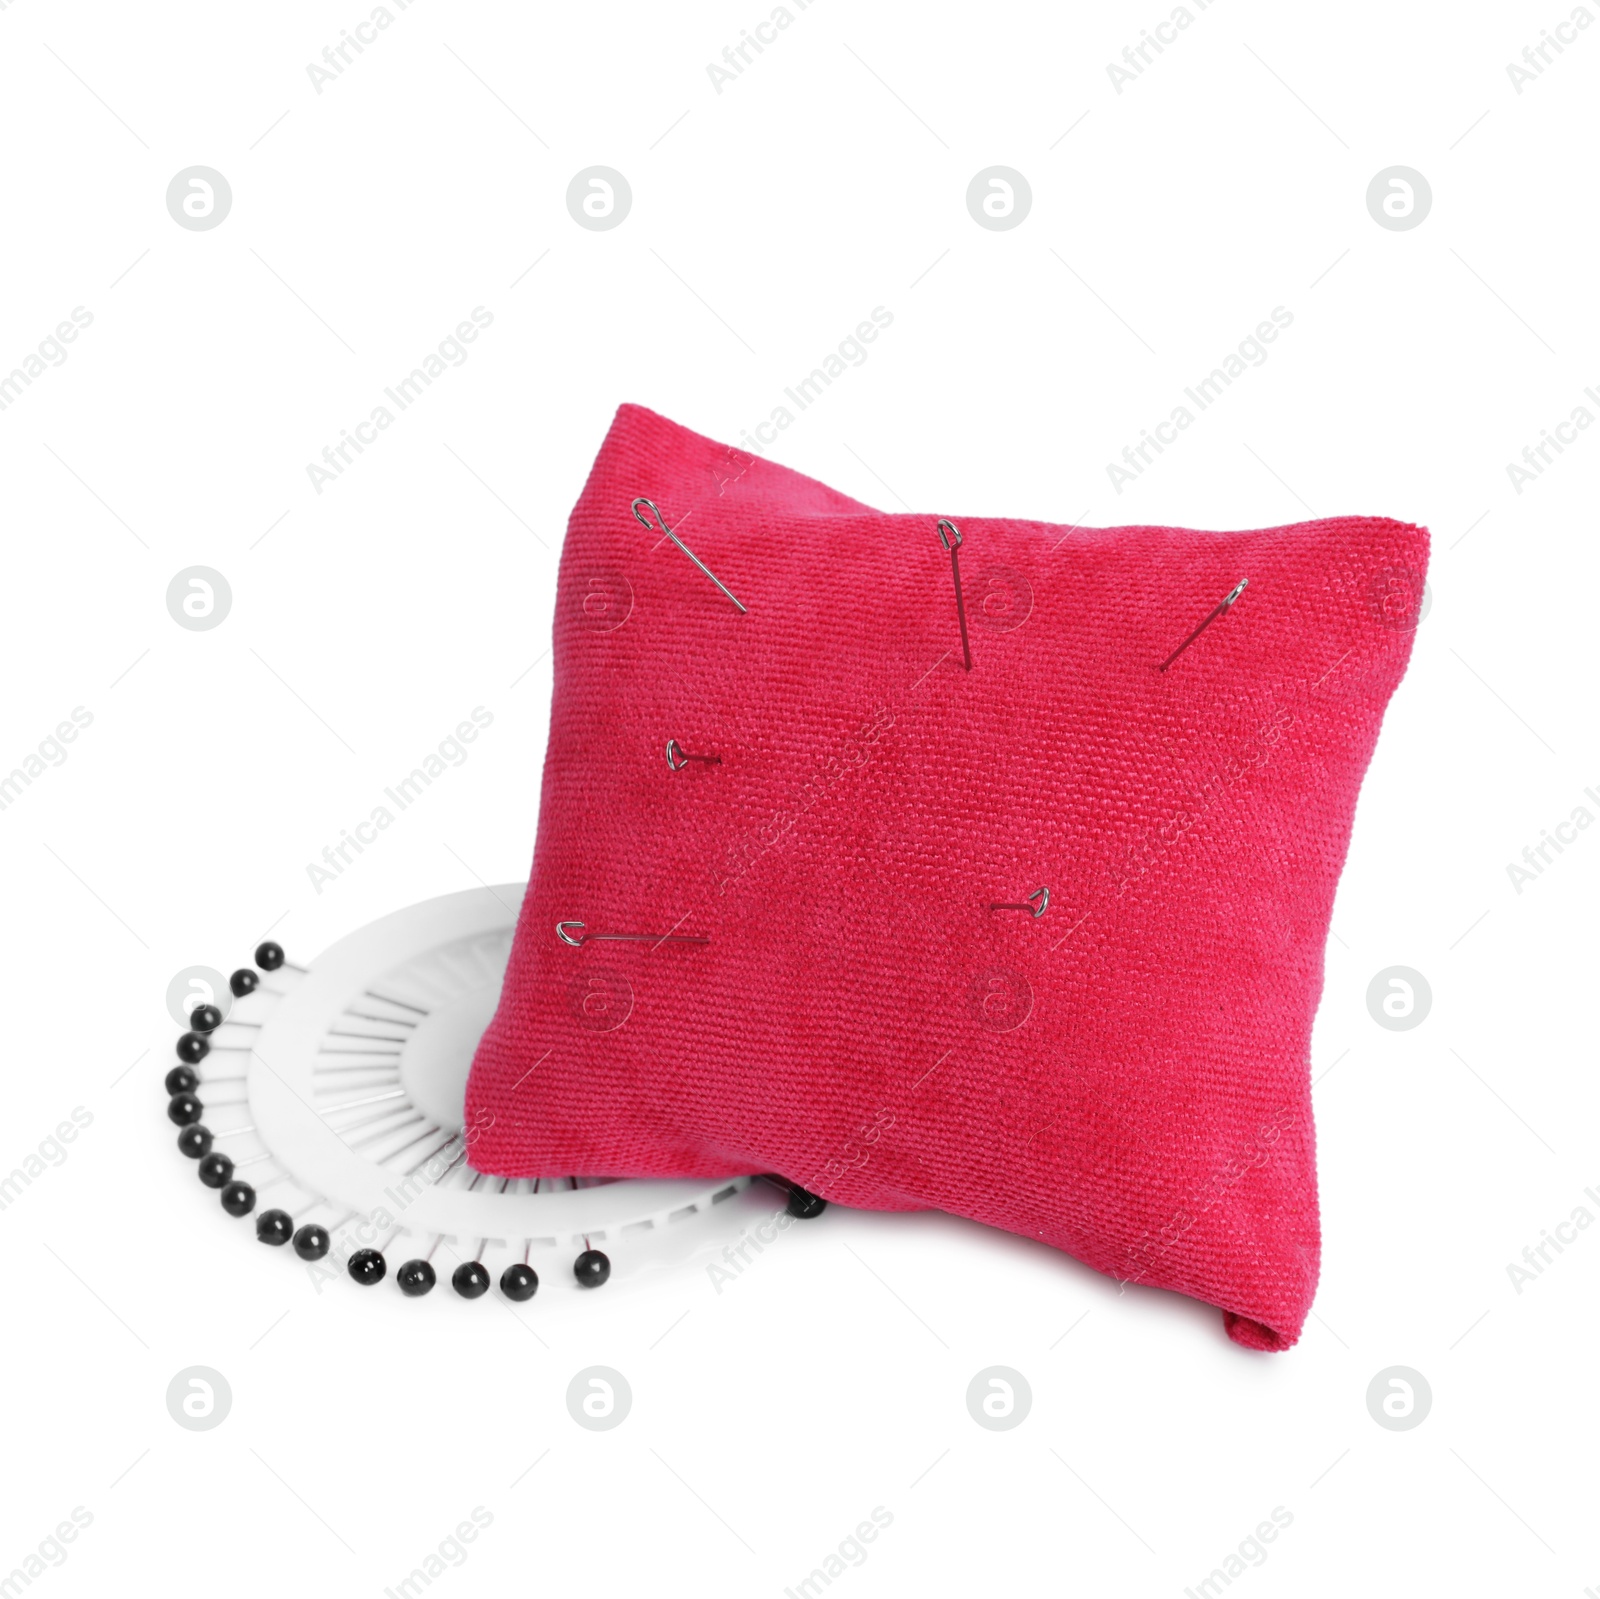 Photo of Pink pincushion with sewing needles and pins isolated on white